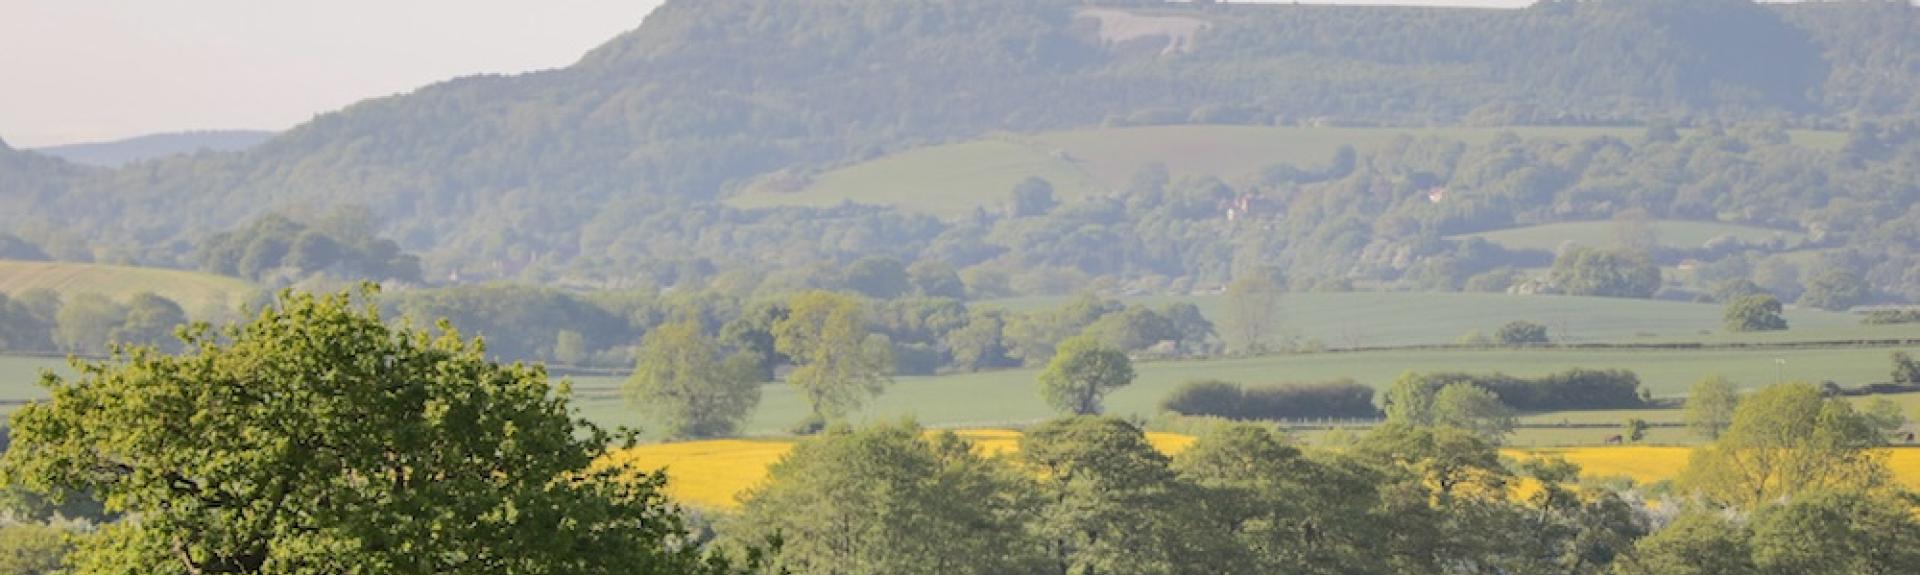 A distant view across a valley with fields of rape flowers in full bloom.